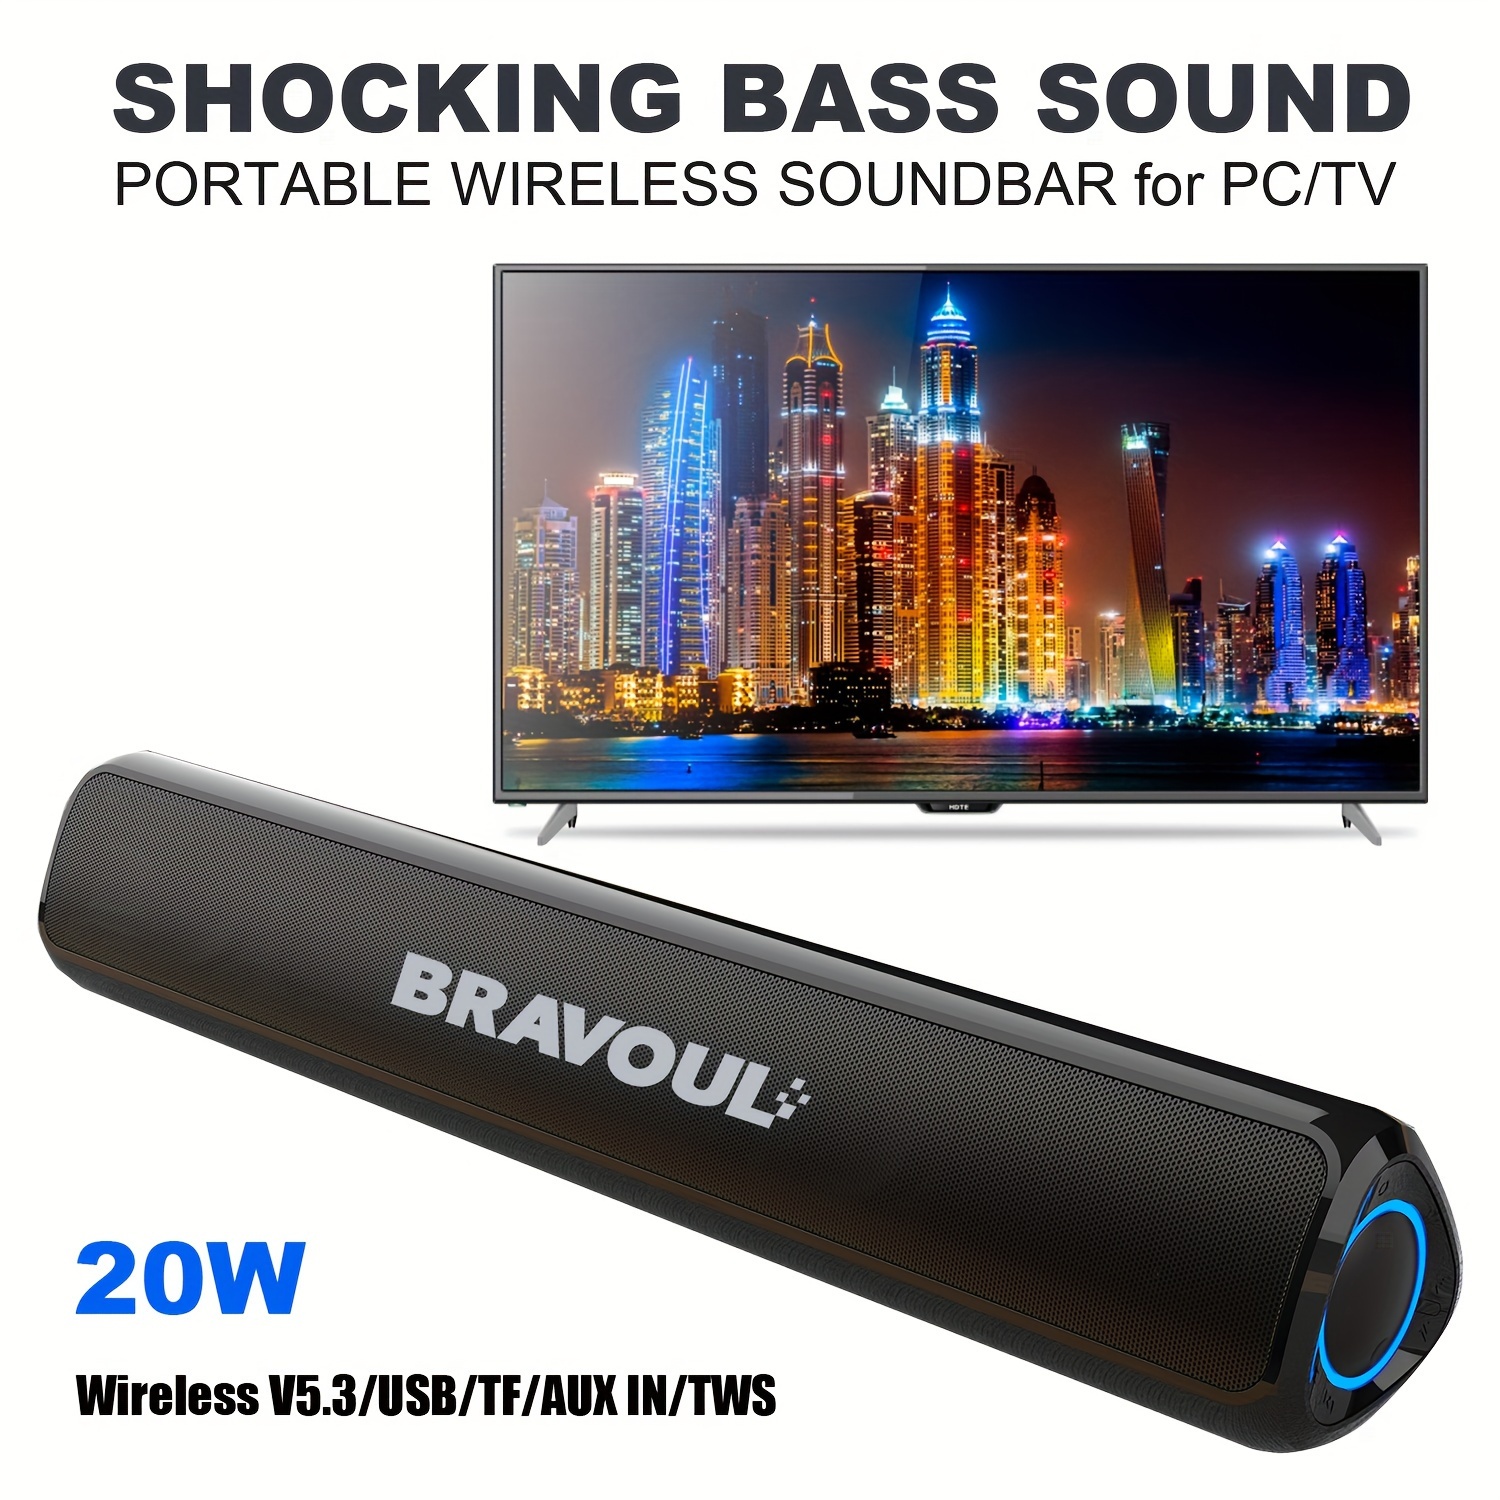 Bluetooth Barra Sonido Con Wired Usb Subwoofer Para Pc/tv –